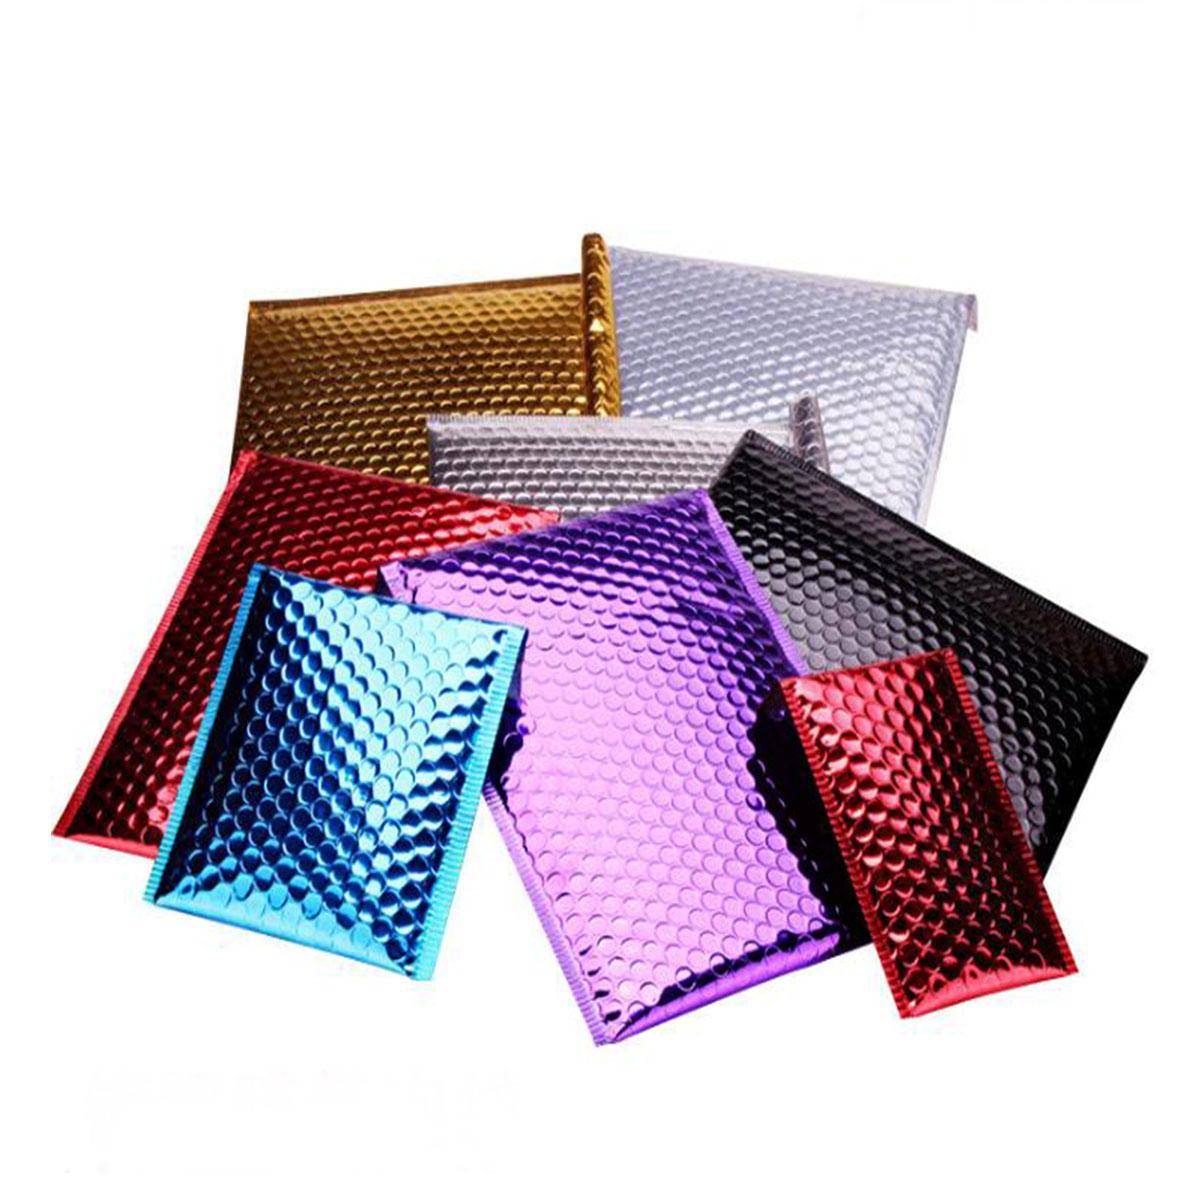 Metallic Bubble Mailers Gold Color Padded Envelopes